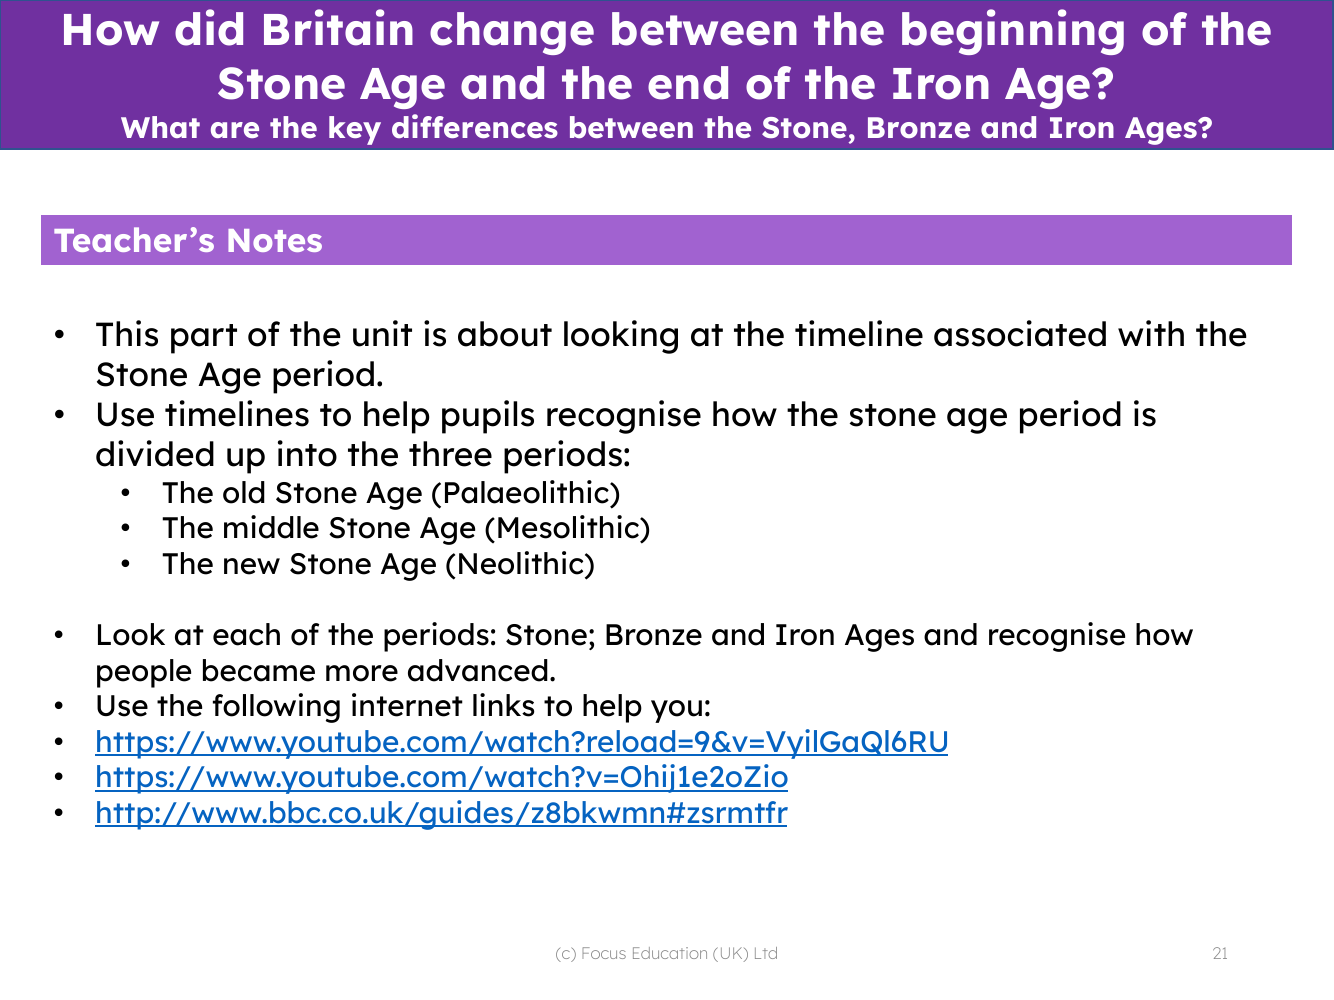 What are the key differences between the stone, bronze and iron ages? - Teacher notes